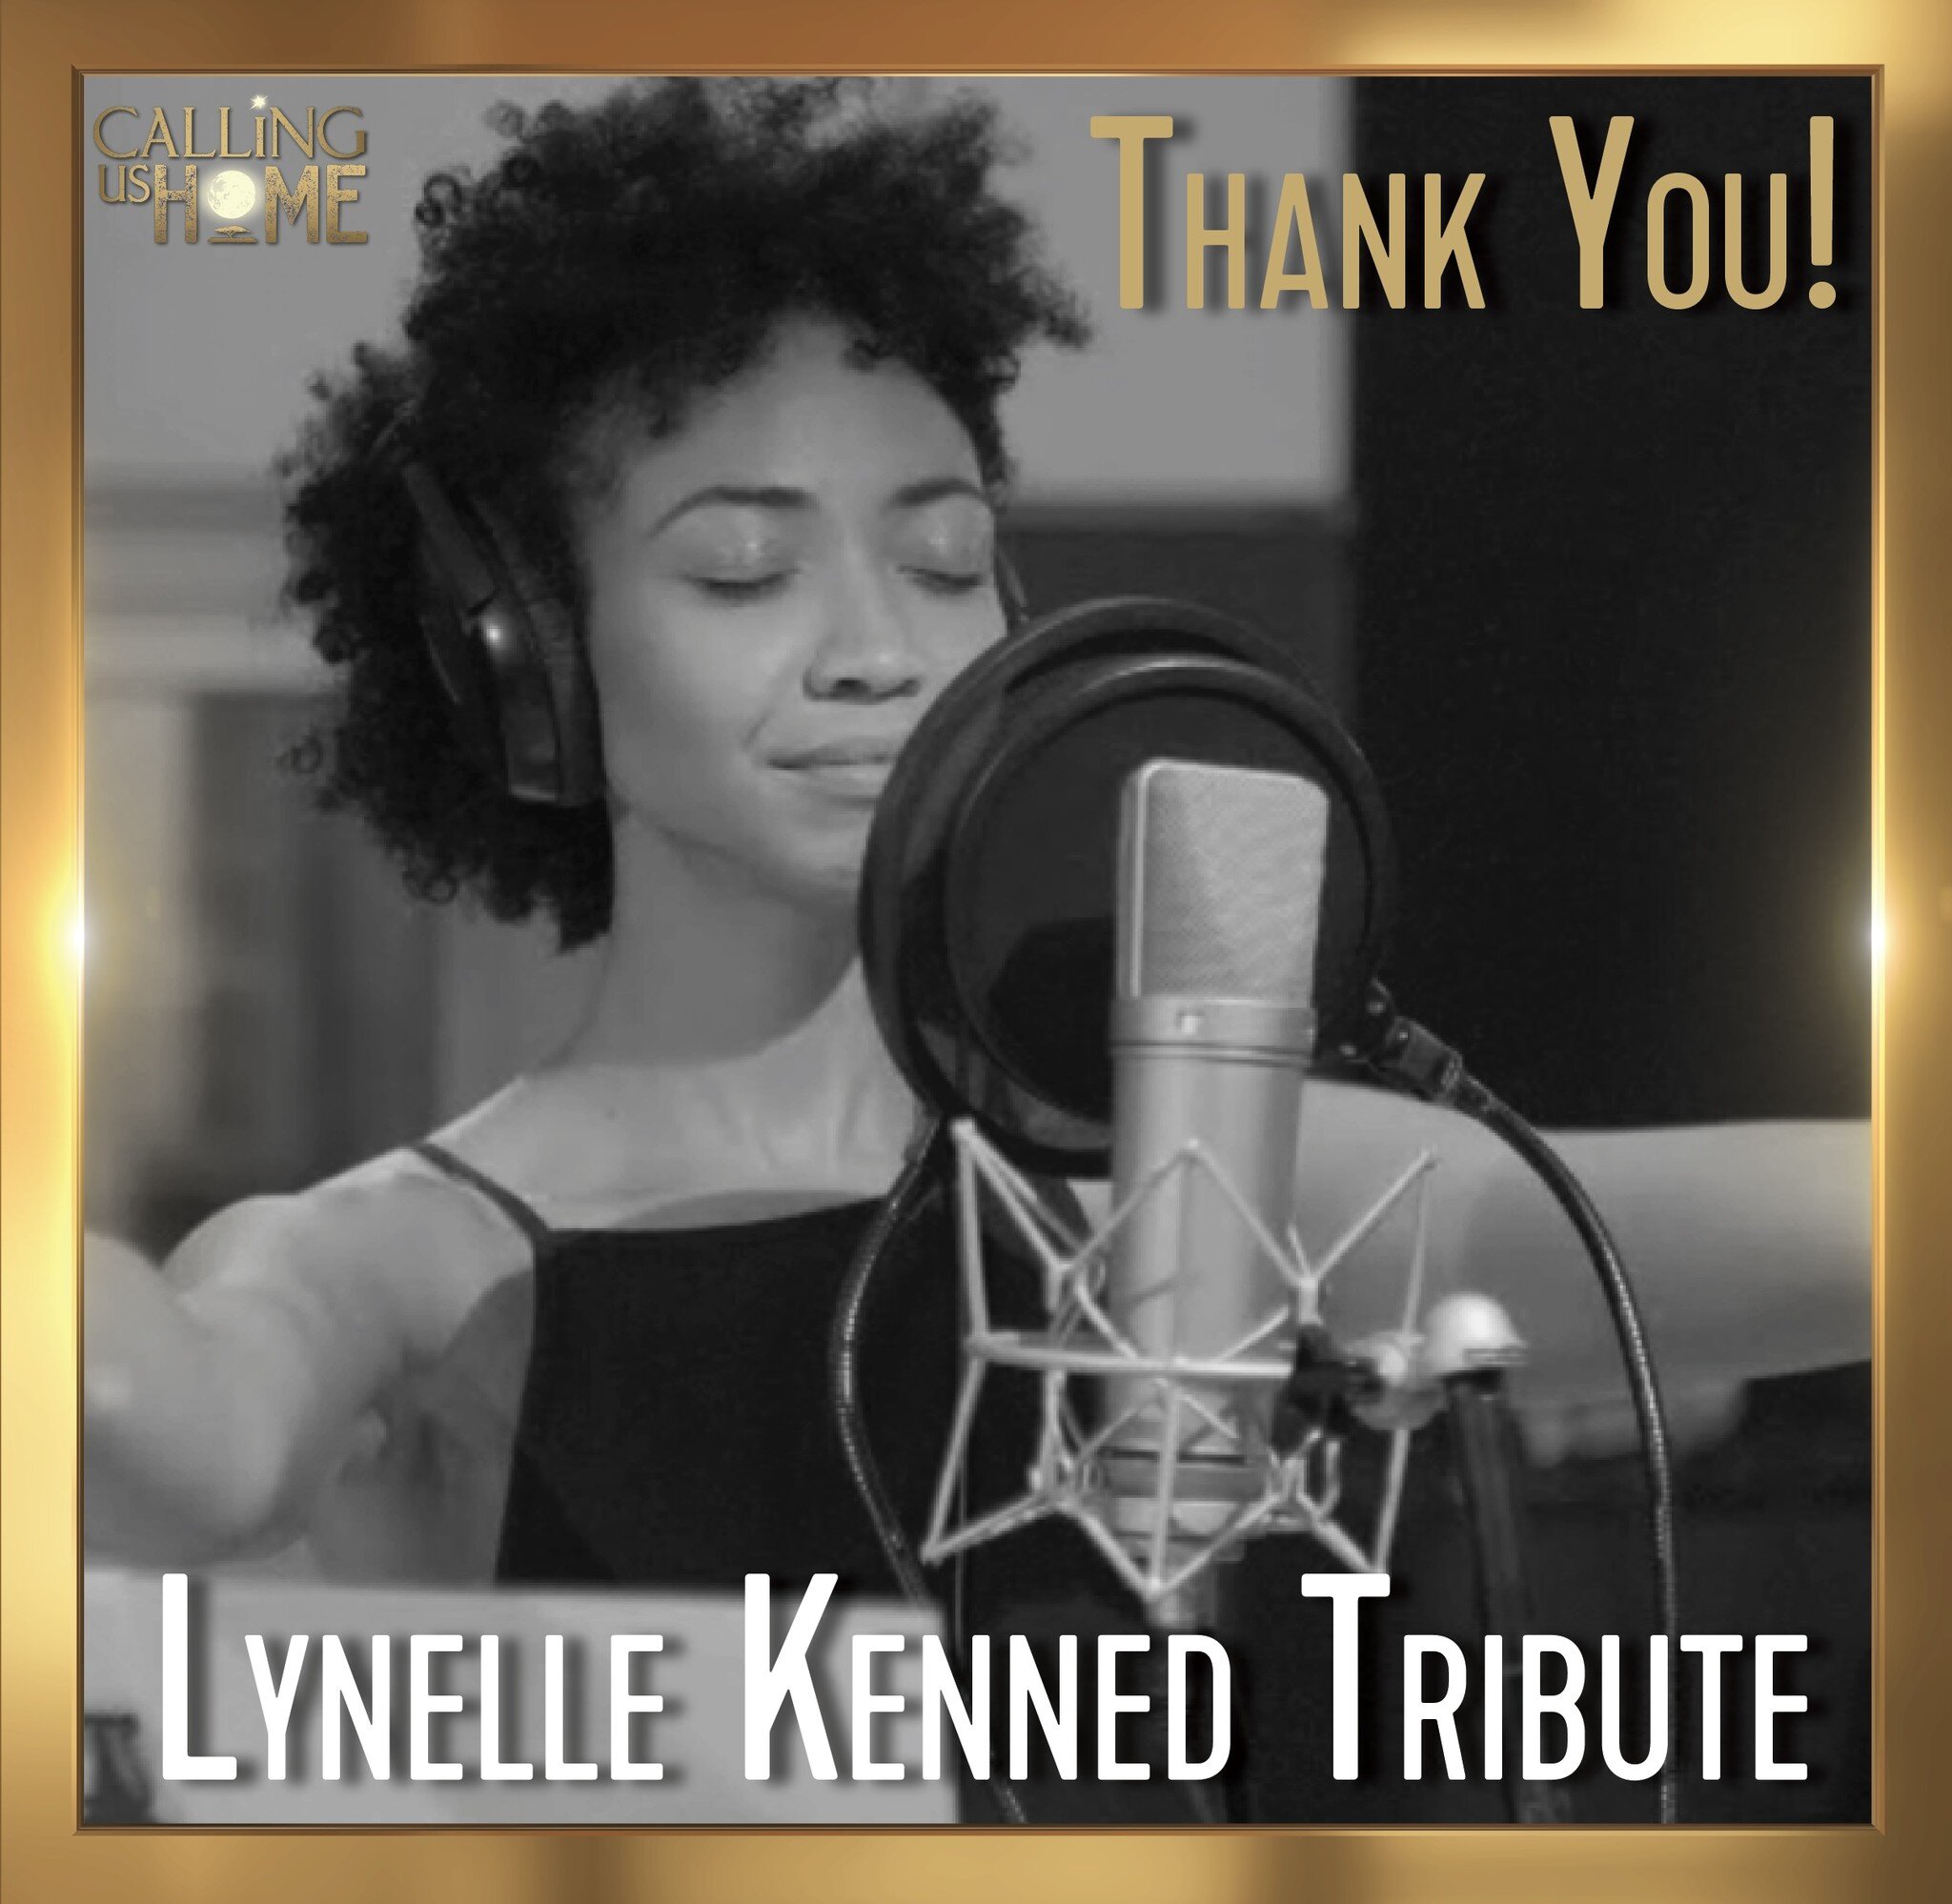 ✨Lynelle Kenned Tribute✨

Our Heroine &lsquo;GRACE&rsquo; was first introduced to #CallingUsHome Audiences in 2017 by the incomparable Lynelle Kenned.
Finding the right person to bring this Kind &amp; Courageous character to life was a challenge&hell